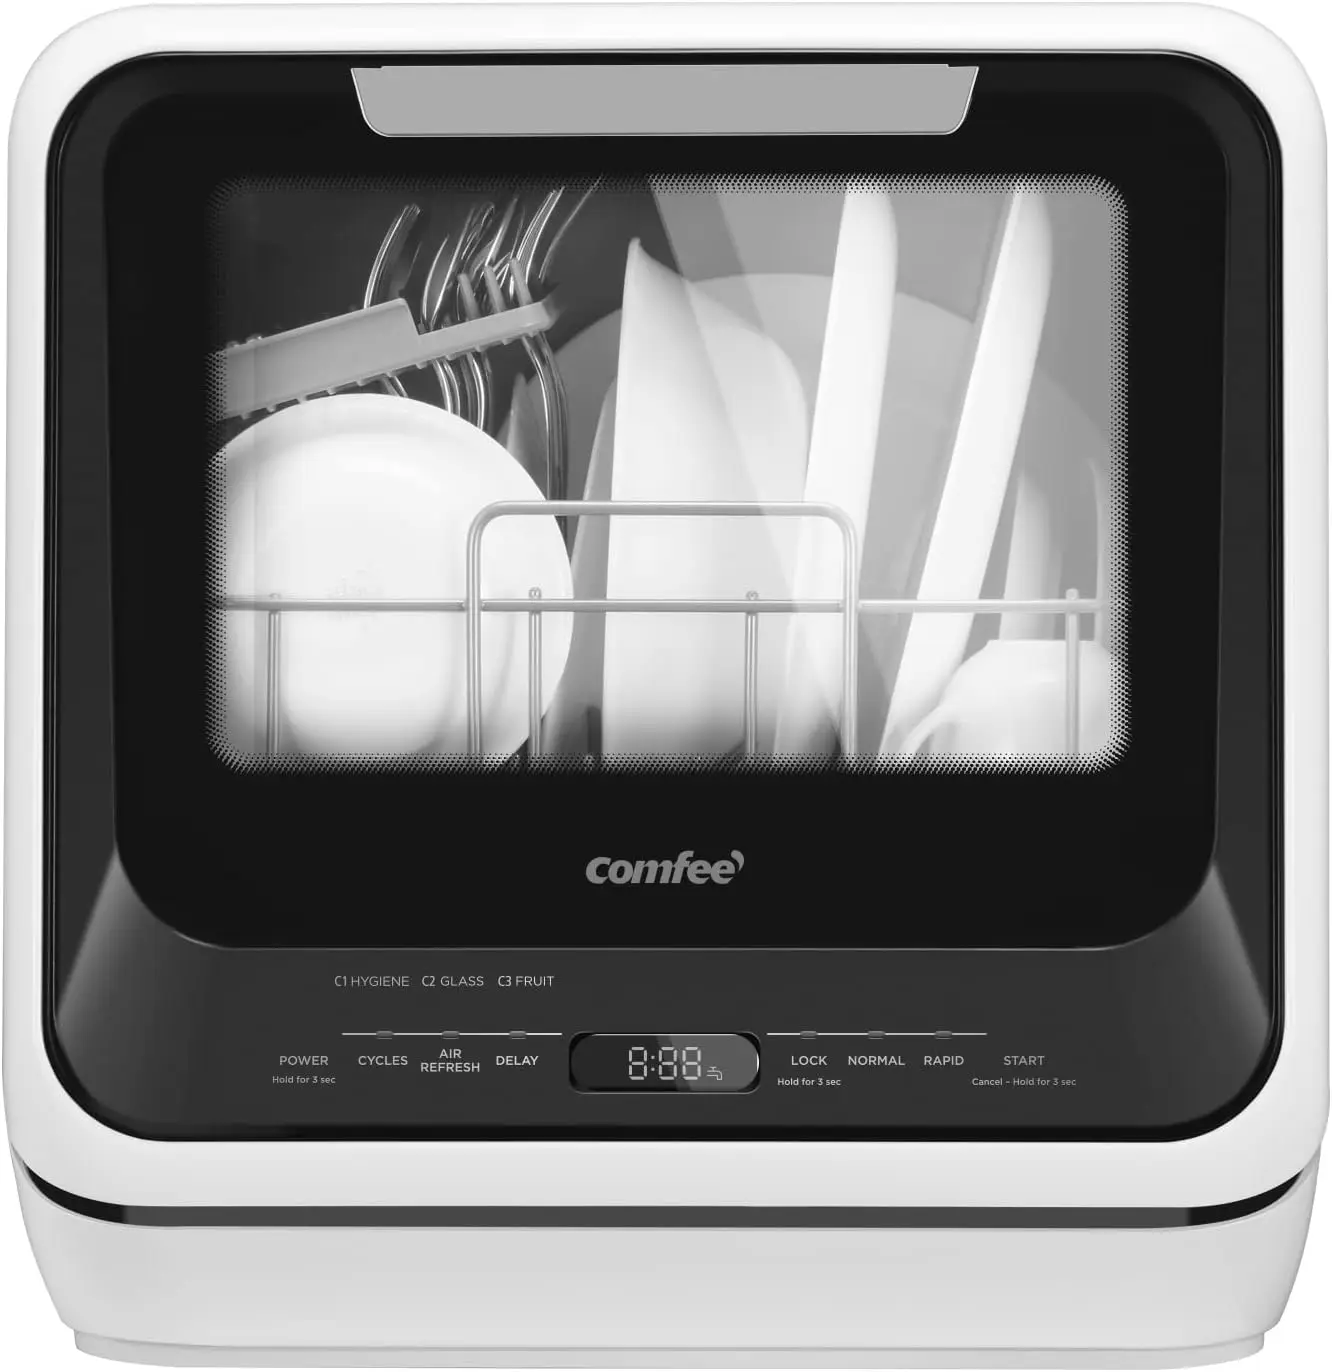 

COMFEE' Portable Mini Dishwasher Countertop with 5L Built-in Water Tank for Apartments& RVs, No Hookup Needed, 6 Programs,